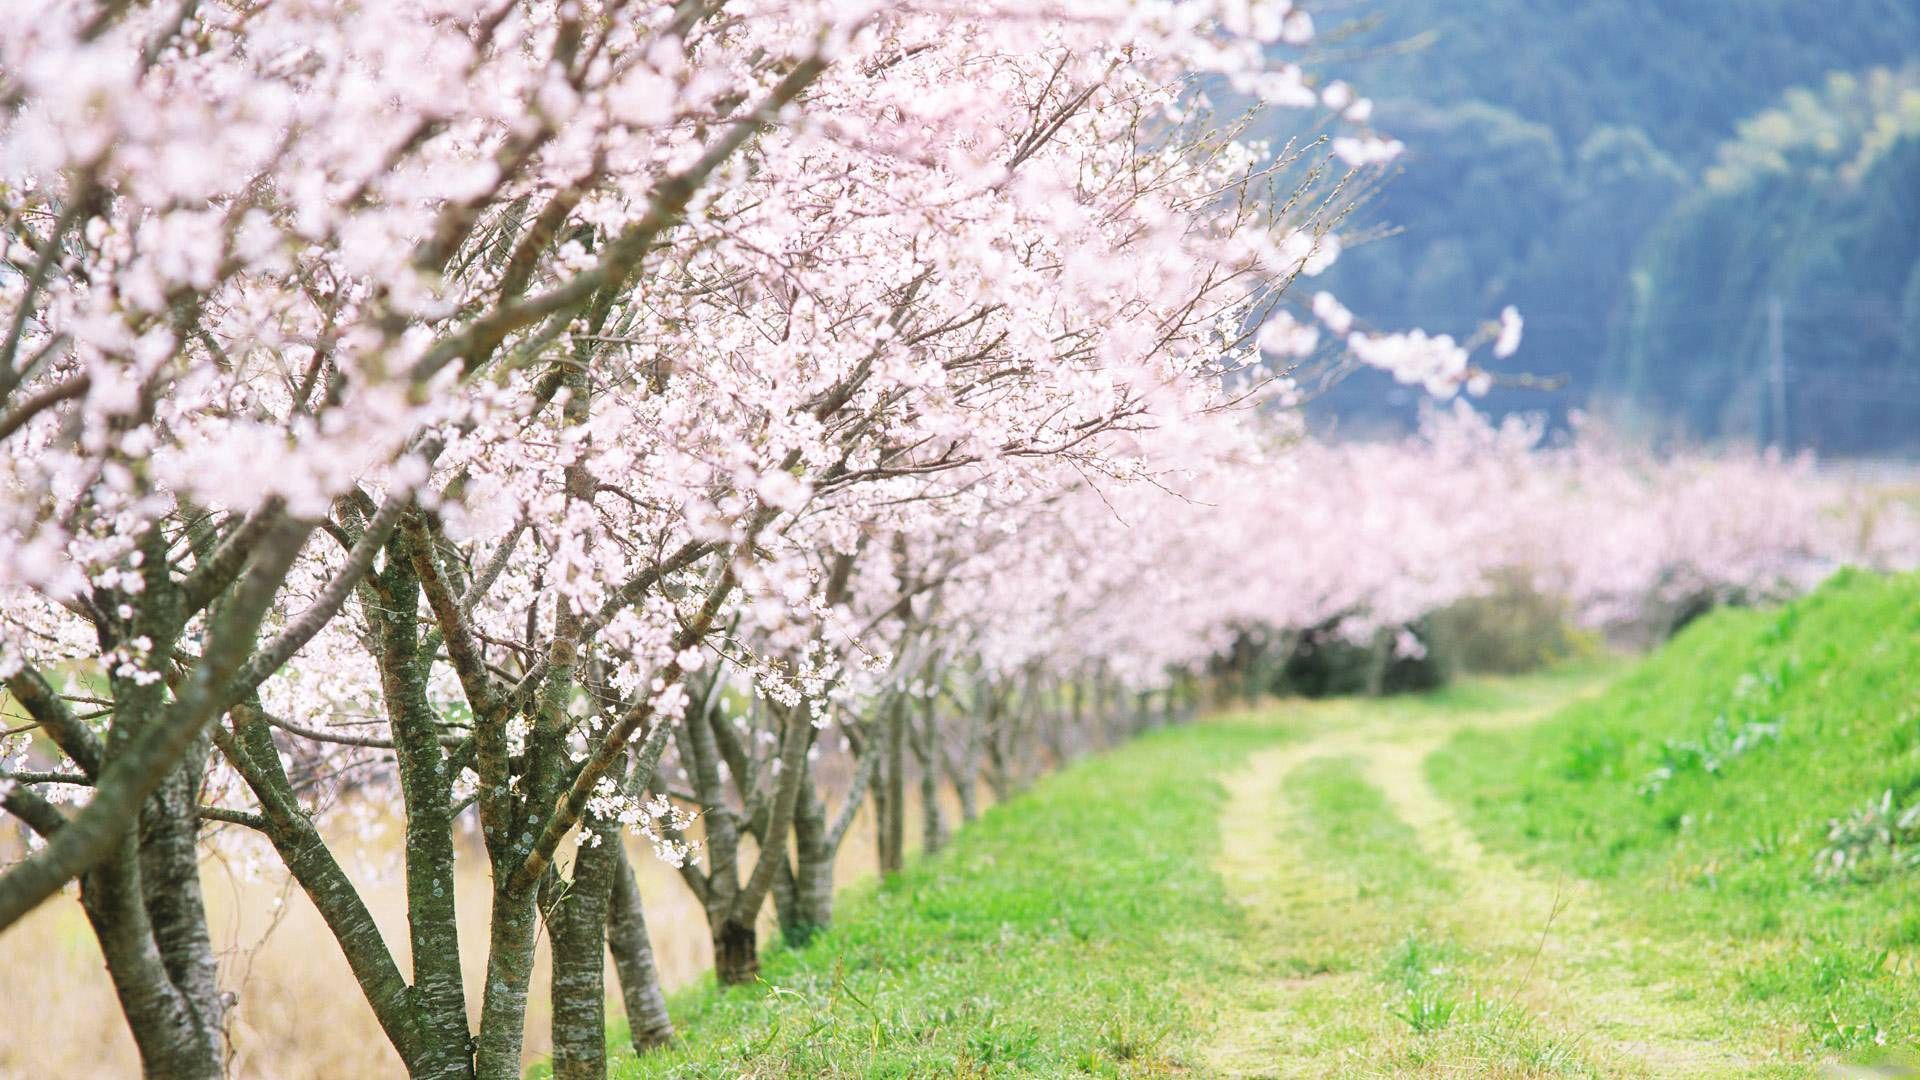 Download wallpaper 1920x1080 spring, trees, flowering, garden, road, country HD background